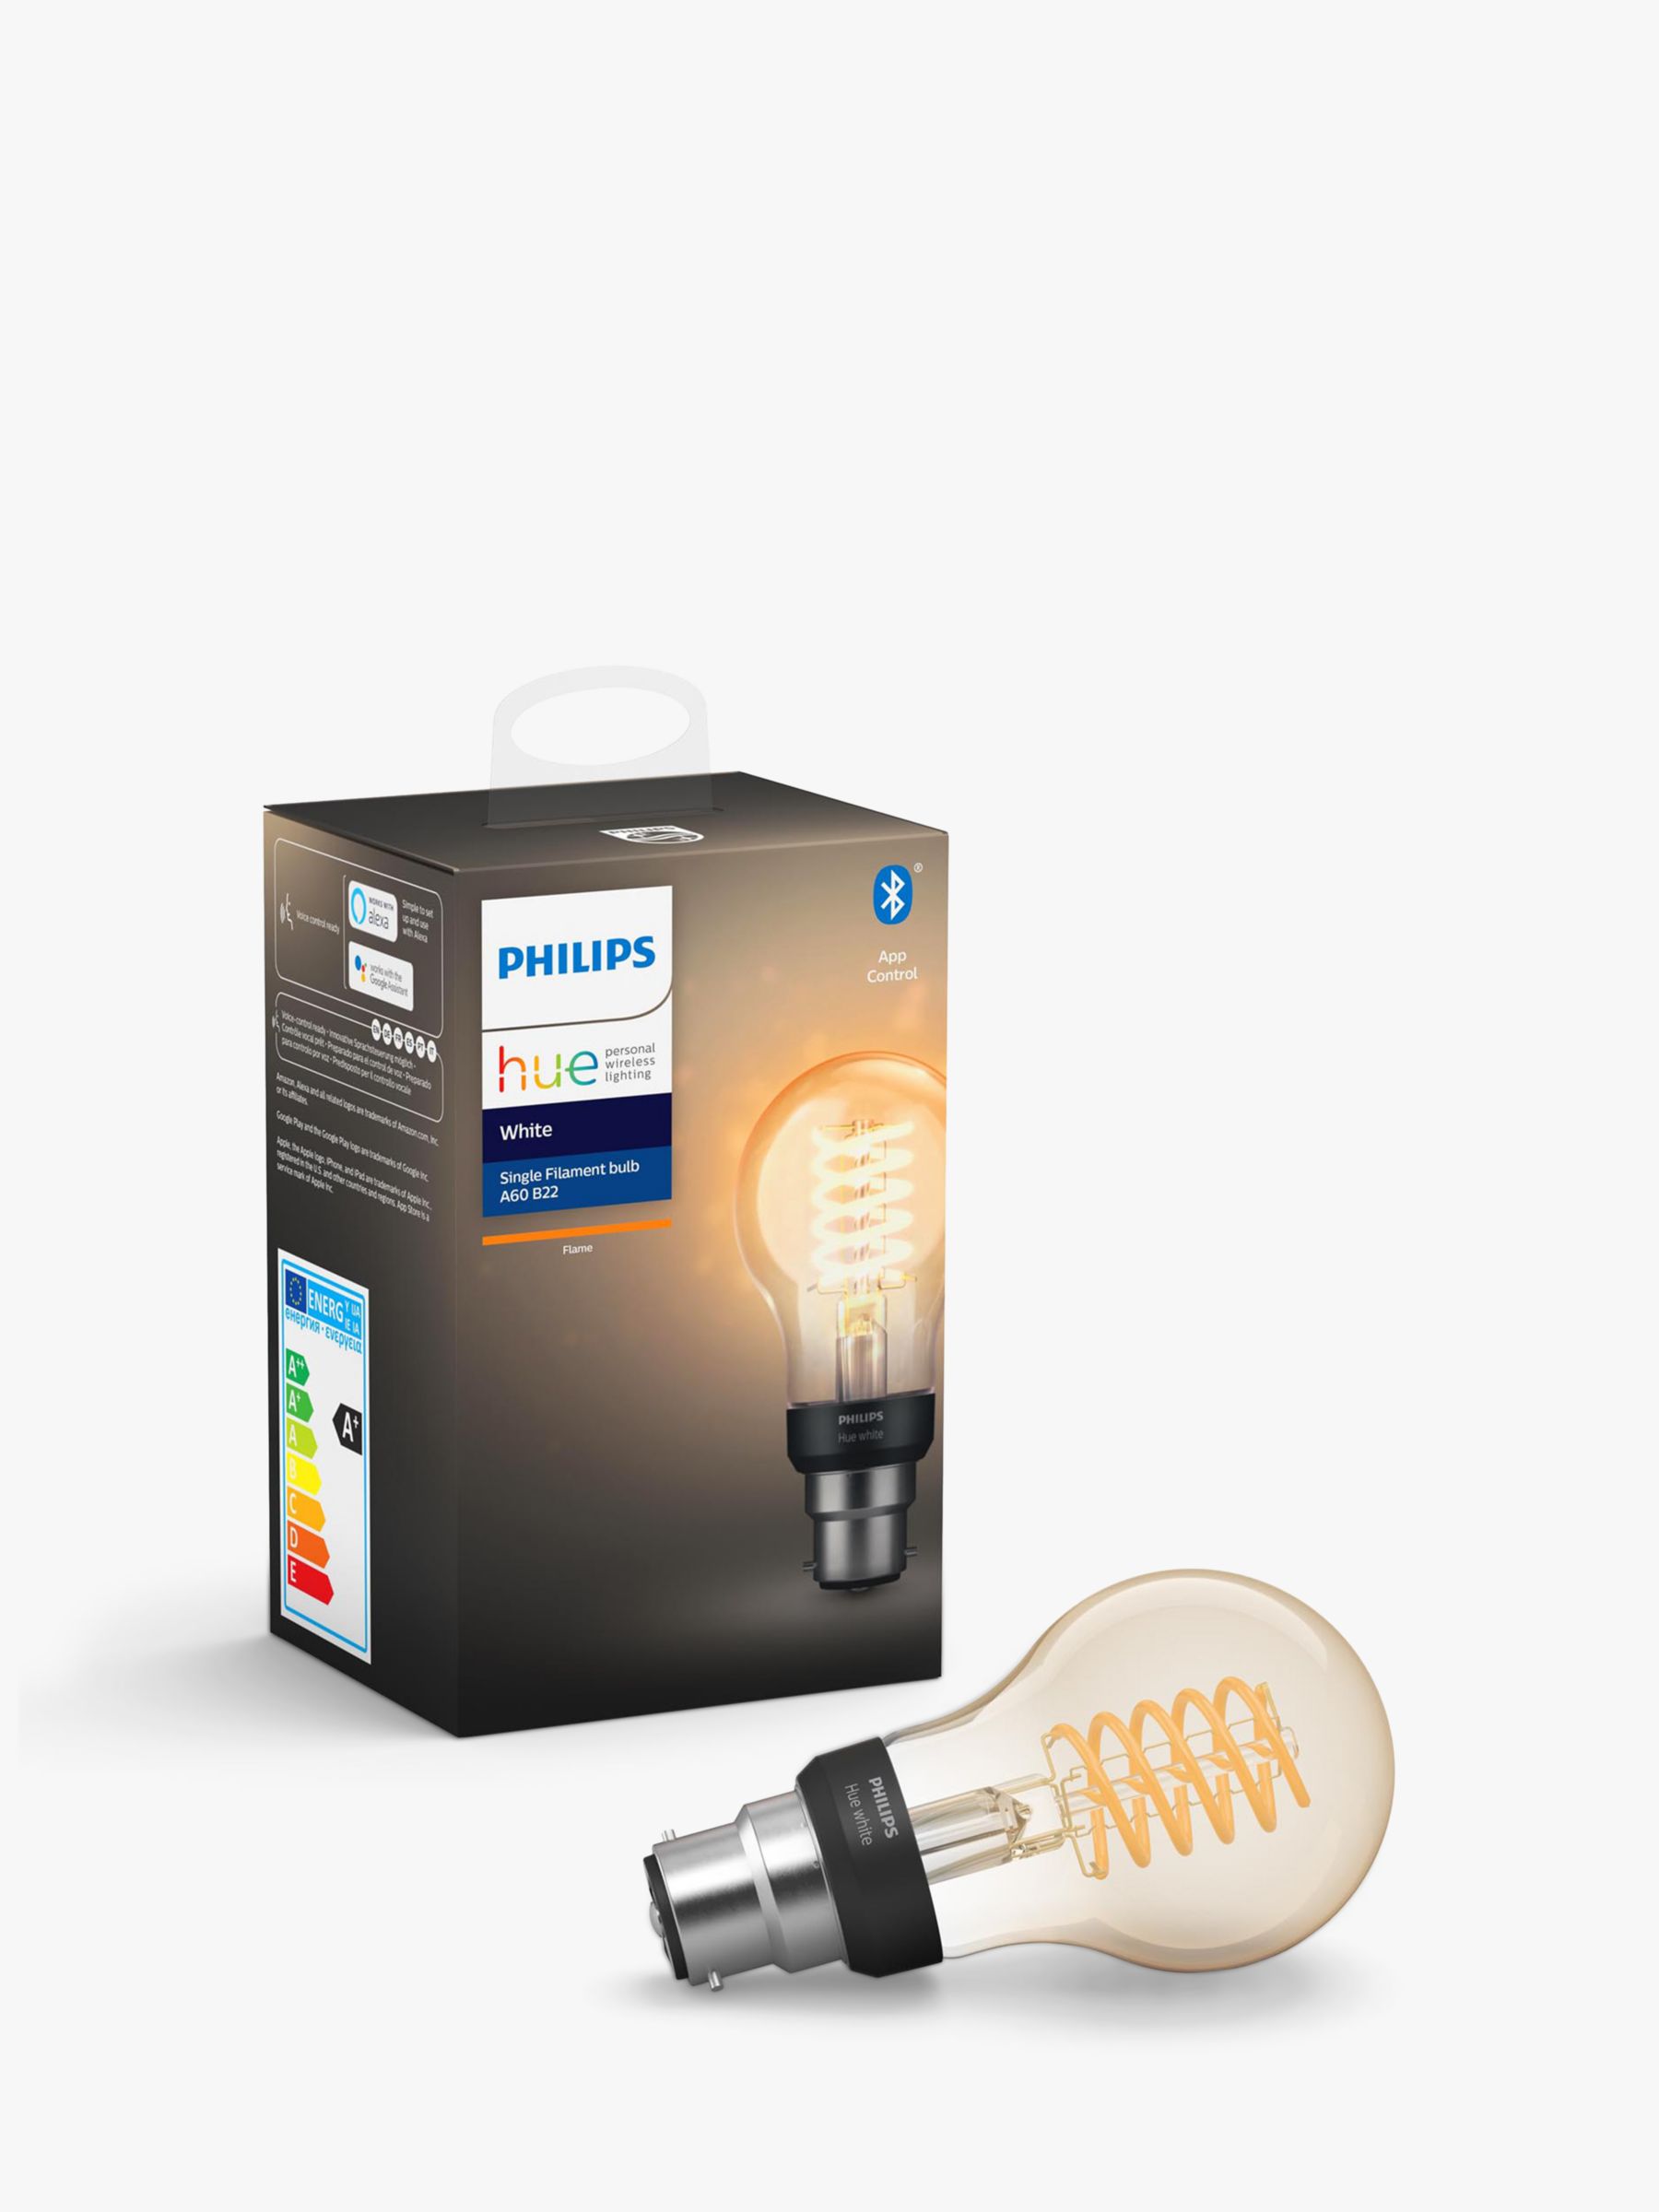 Philips Hue White 7W B22 LED Dimmable Smart Classic Filament Bulb with